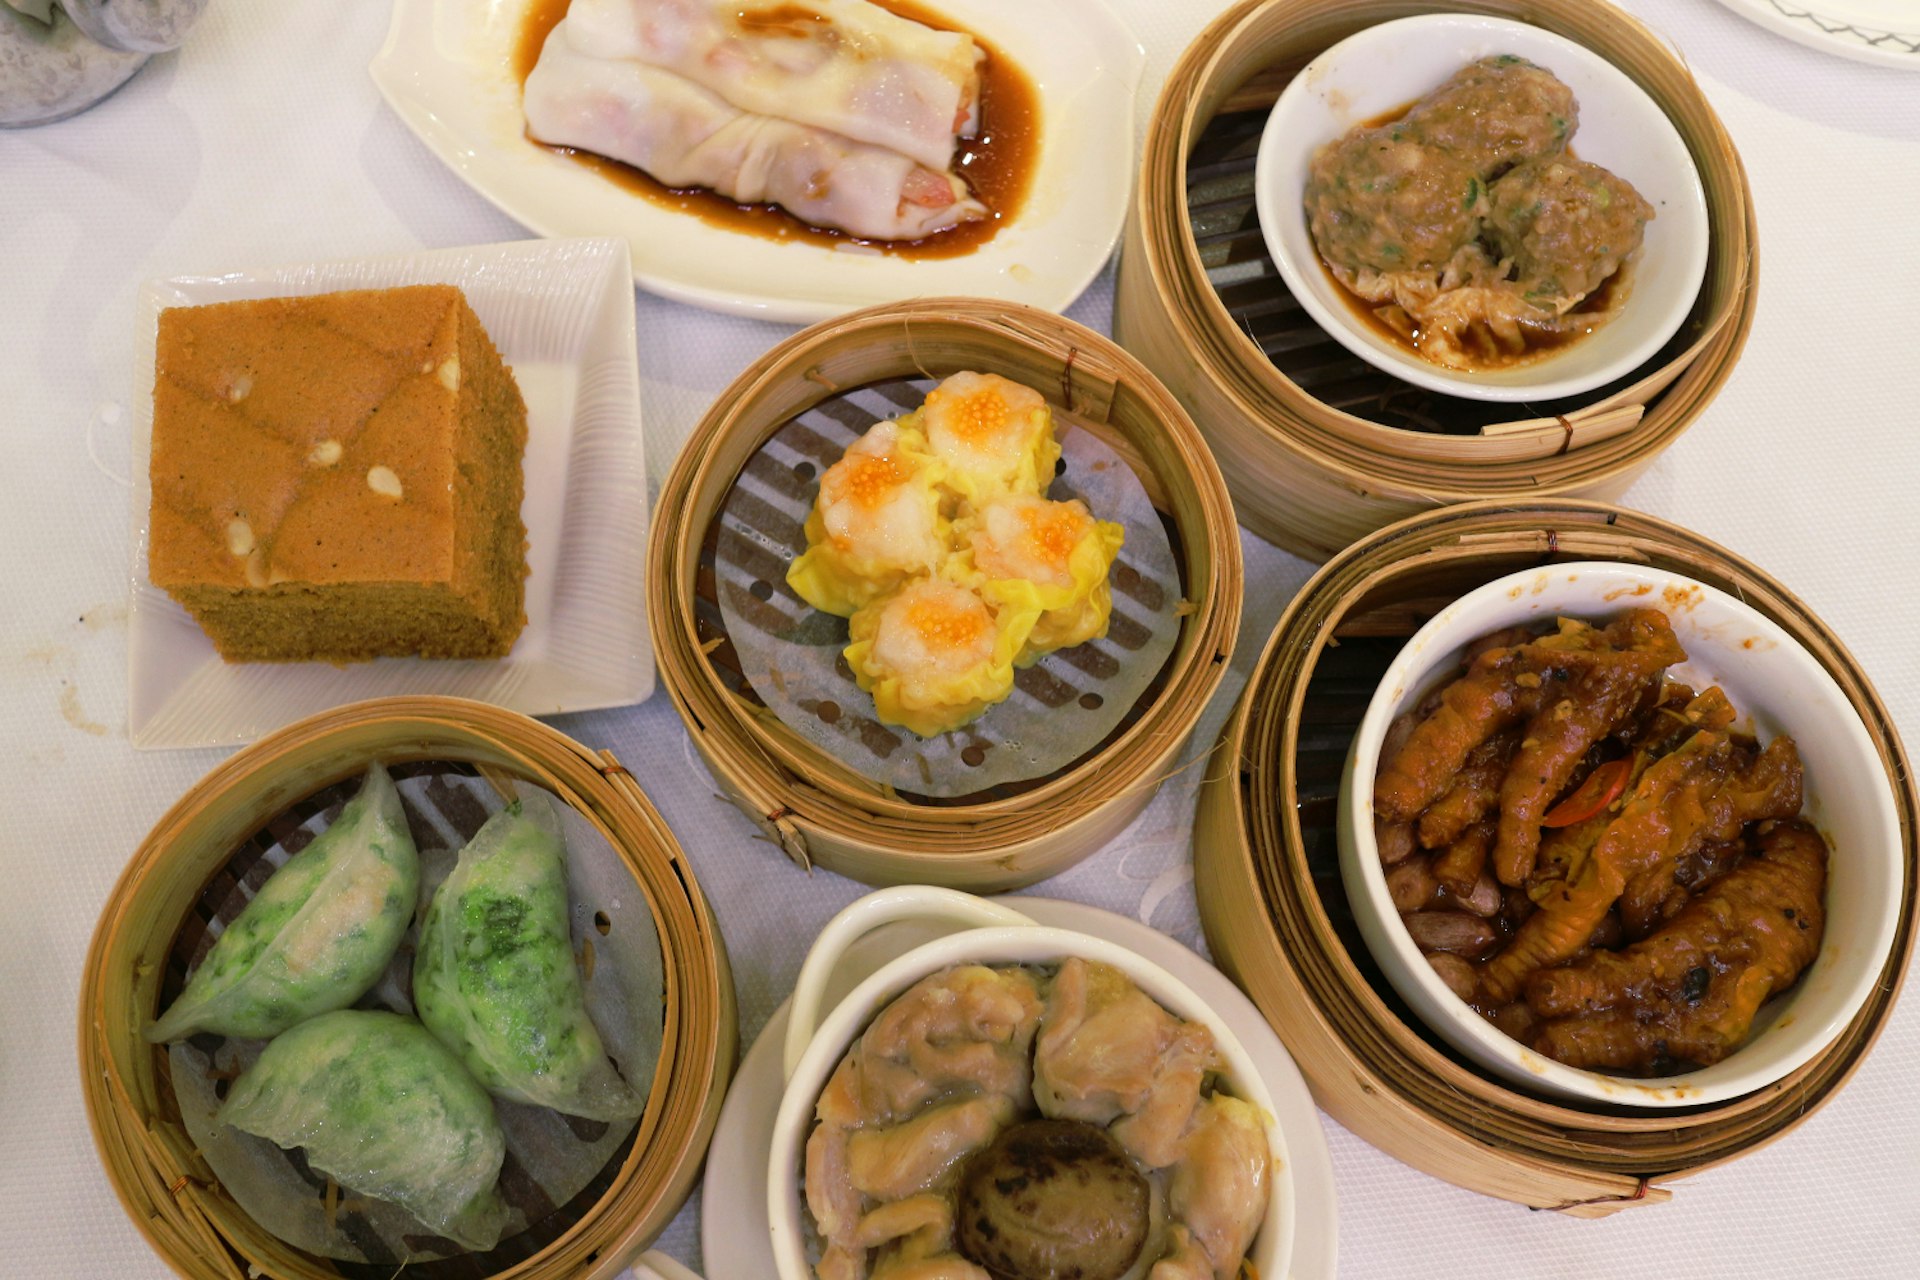 Classic teatime: dim sum snacks. Image by Piera Chen / Lonely Planet